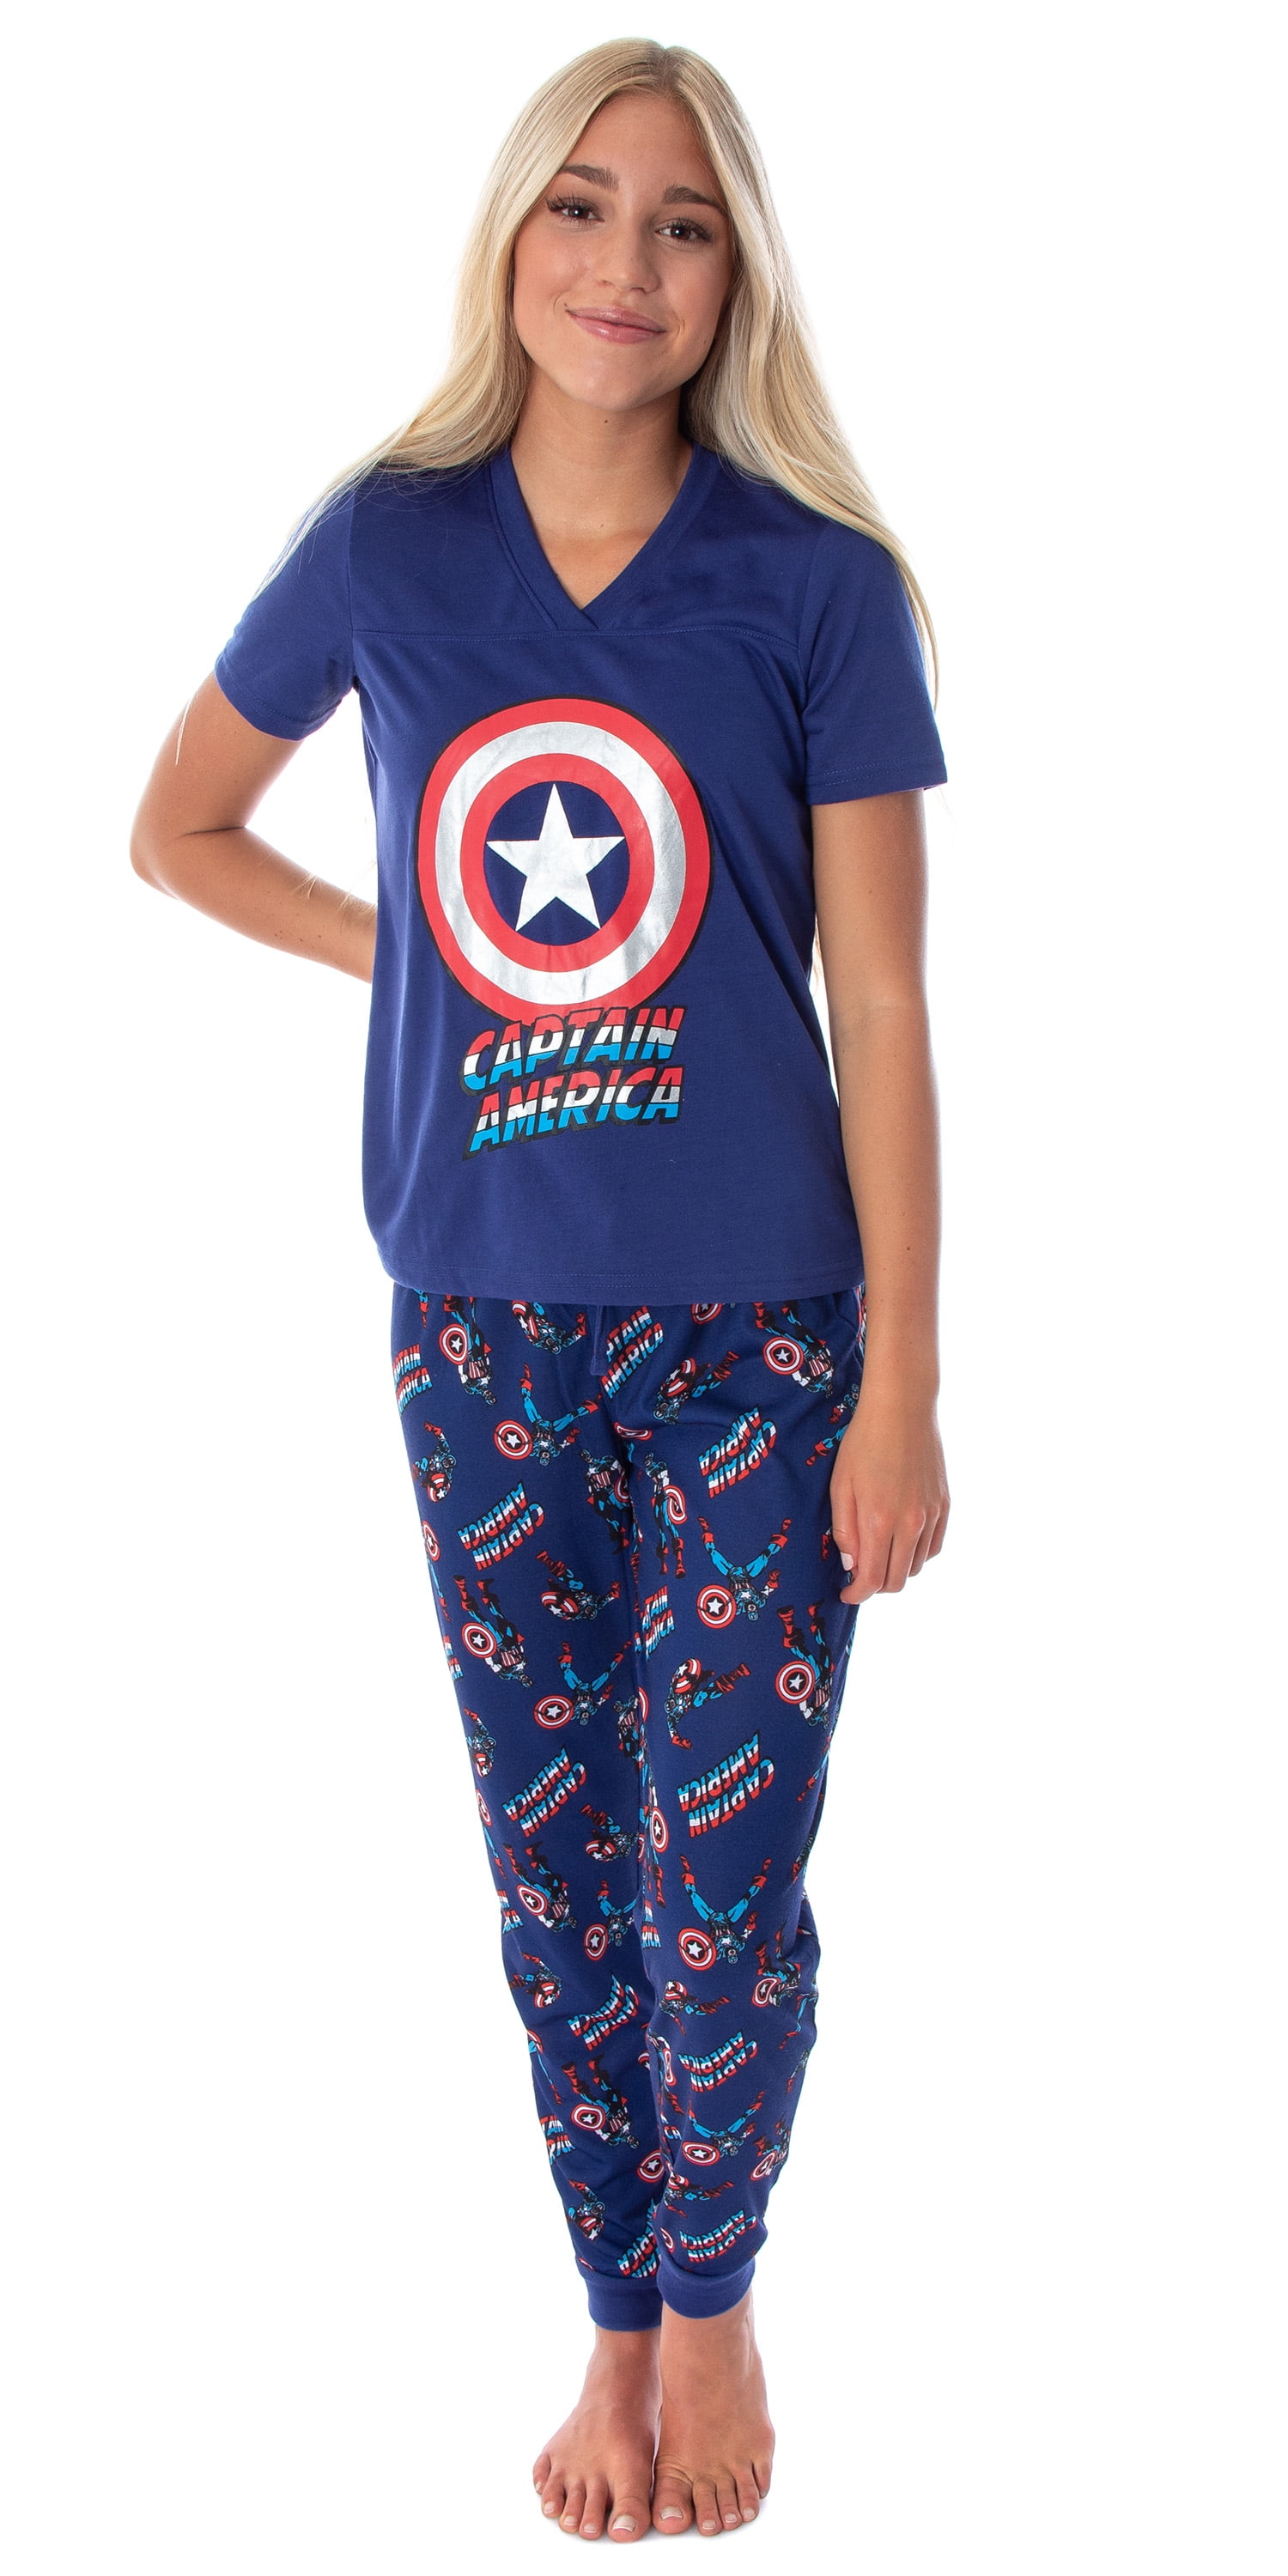 Captain America The Avengers Pants - FREE SHIPPING